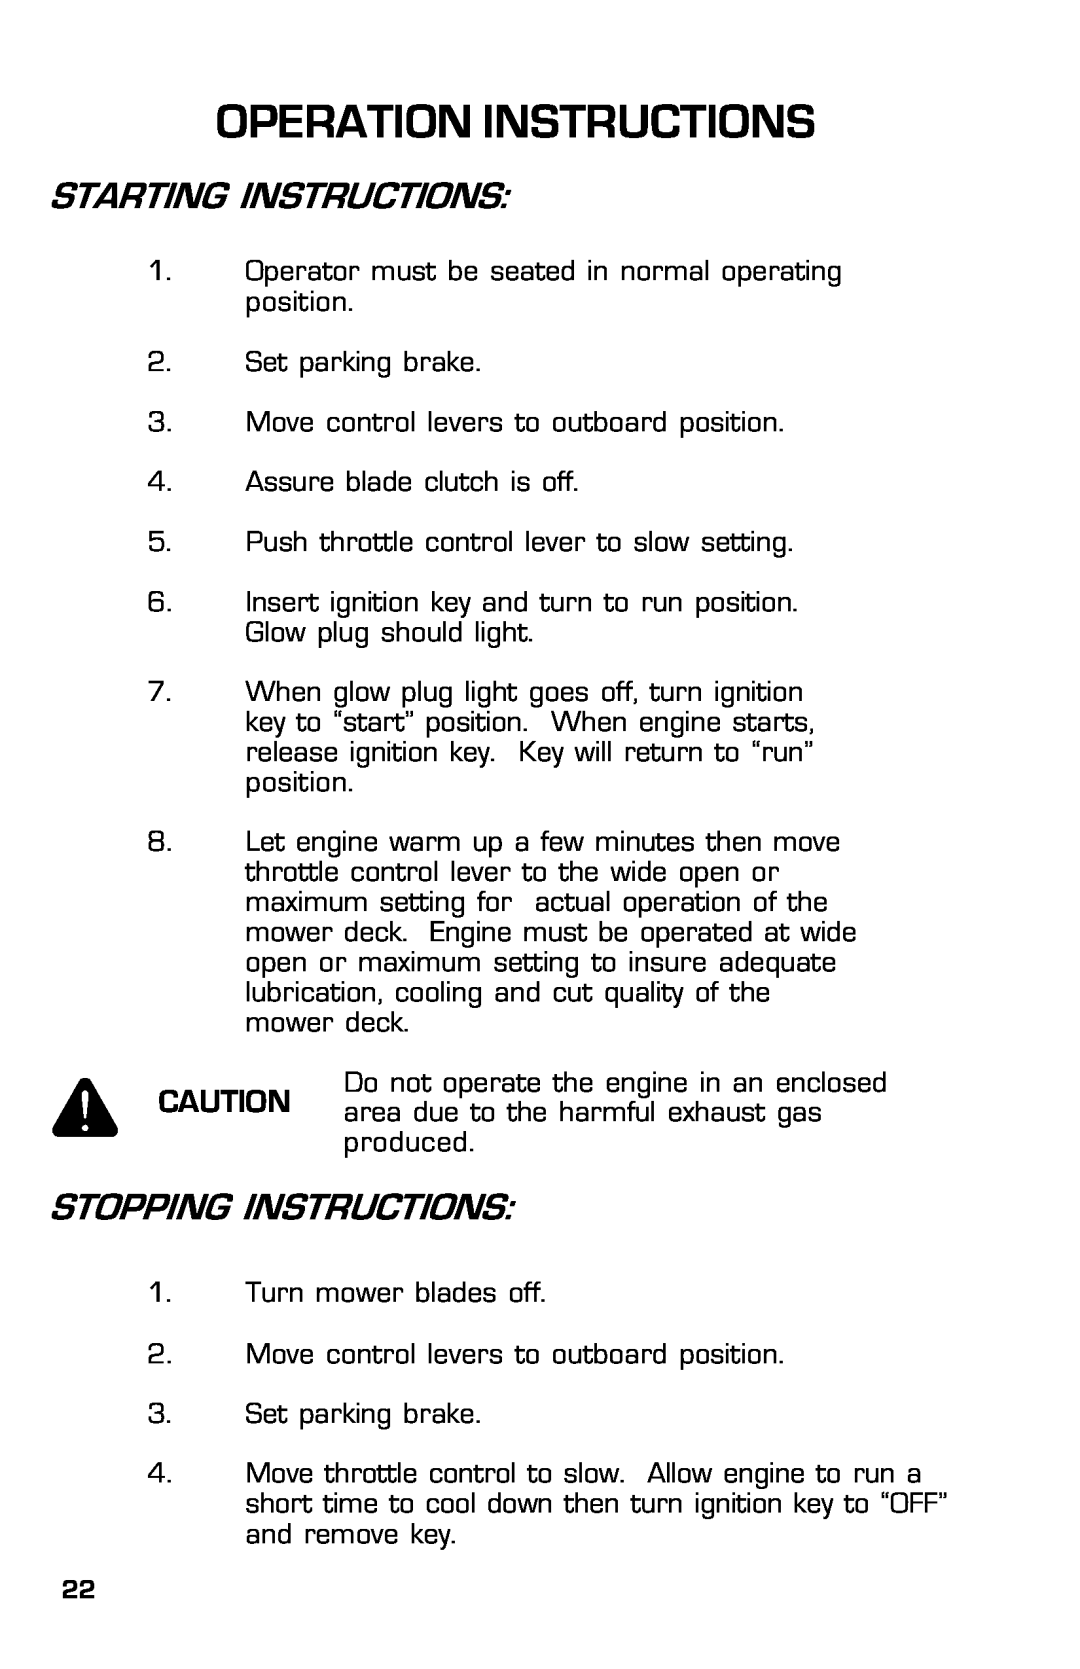 Dixon 8000D manual Starting Instructions, Stopping Instructions, Operation Instructions 